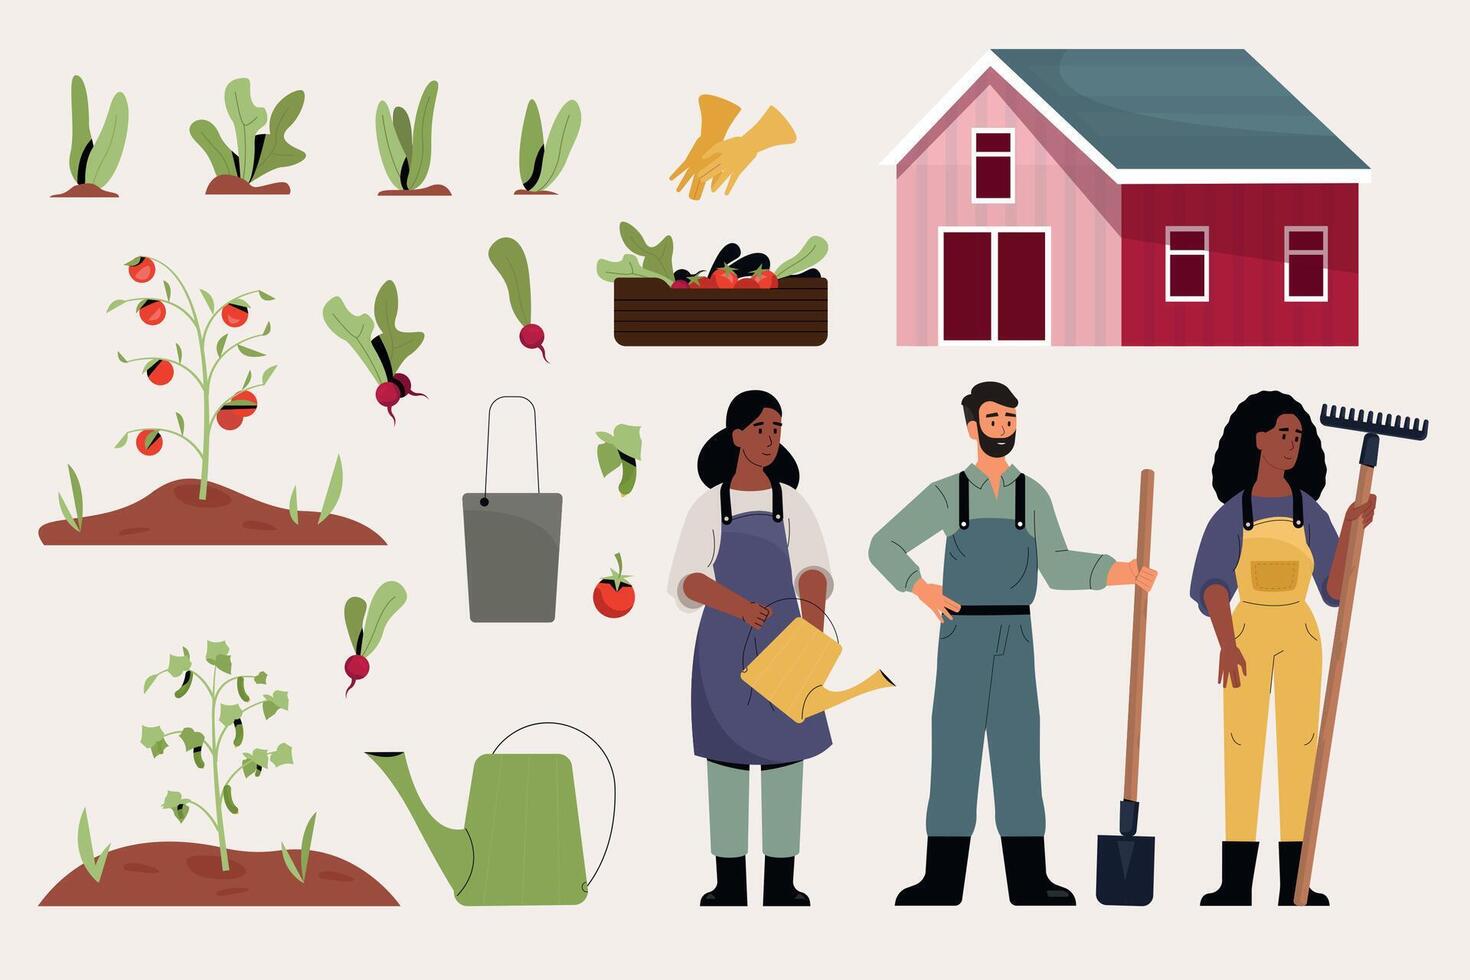 Farmers and crops. Cartoon characters working in farm with organic plants and tools, gardening and agriculture soil work concept, farm workers at work. Vector flat set